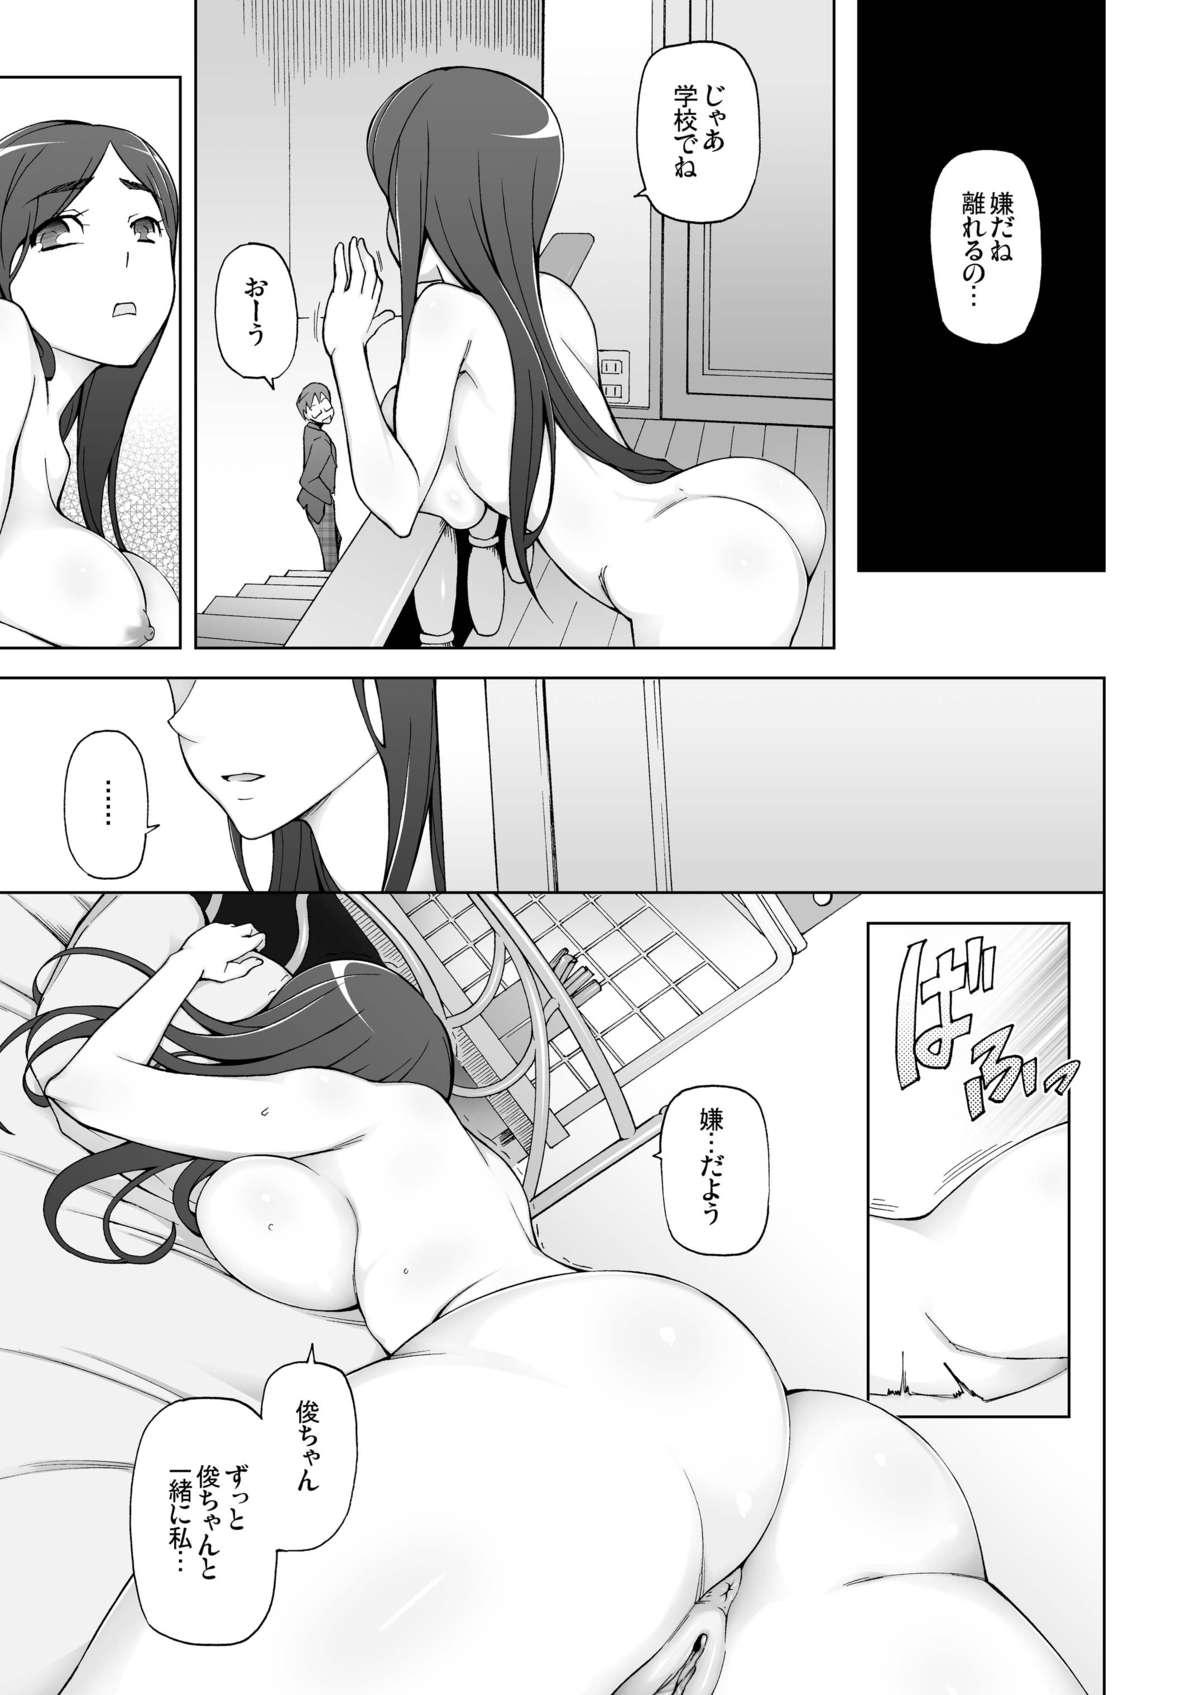 Reverse Cowgirl LUSTFUL BERRY escalate0.5 Cop - Page 3